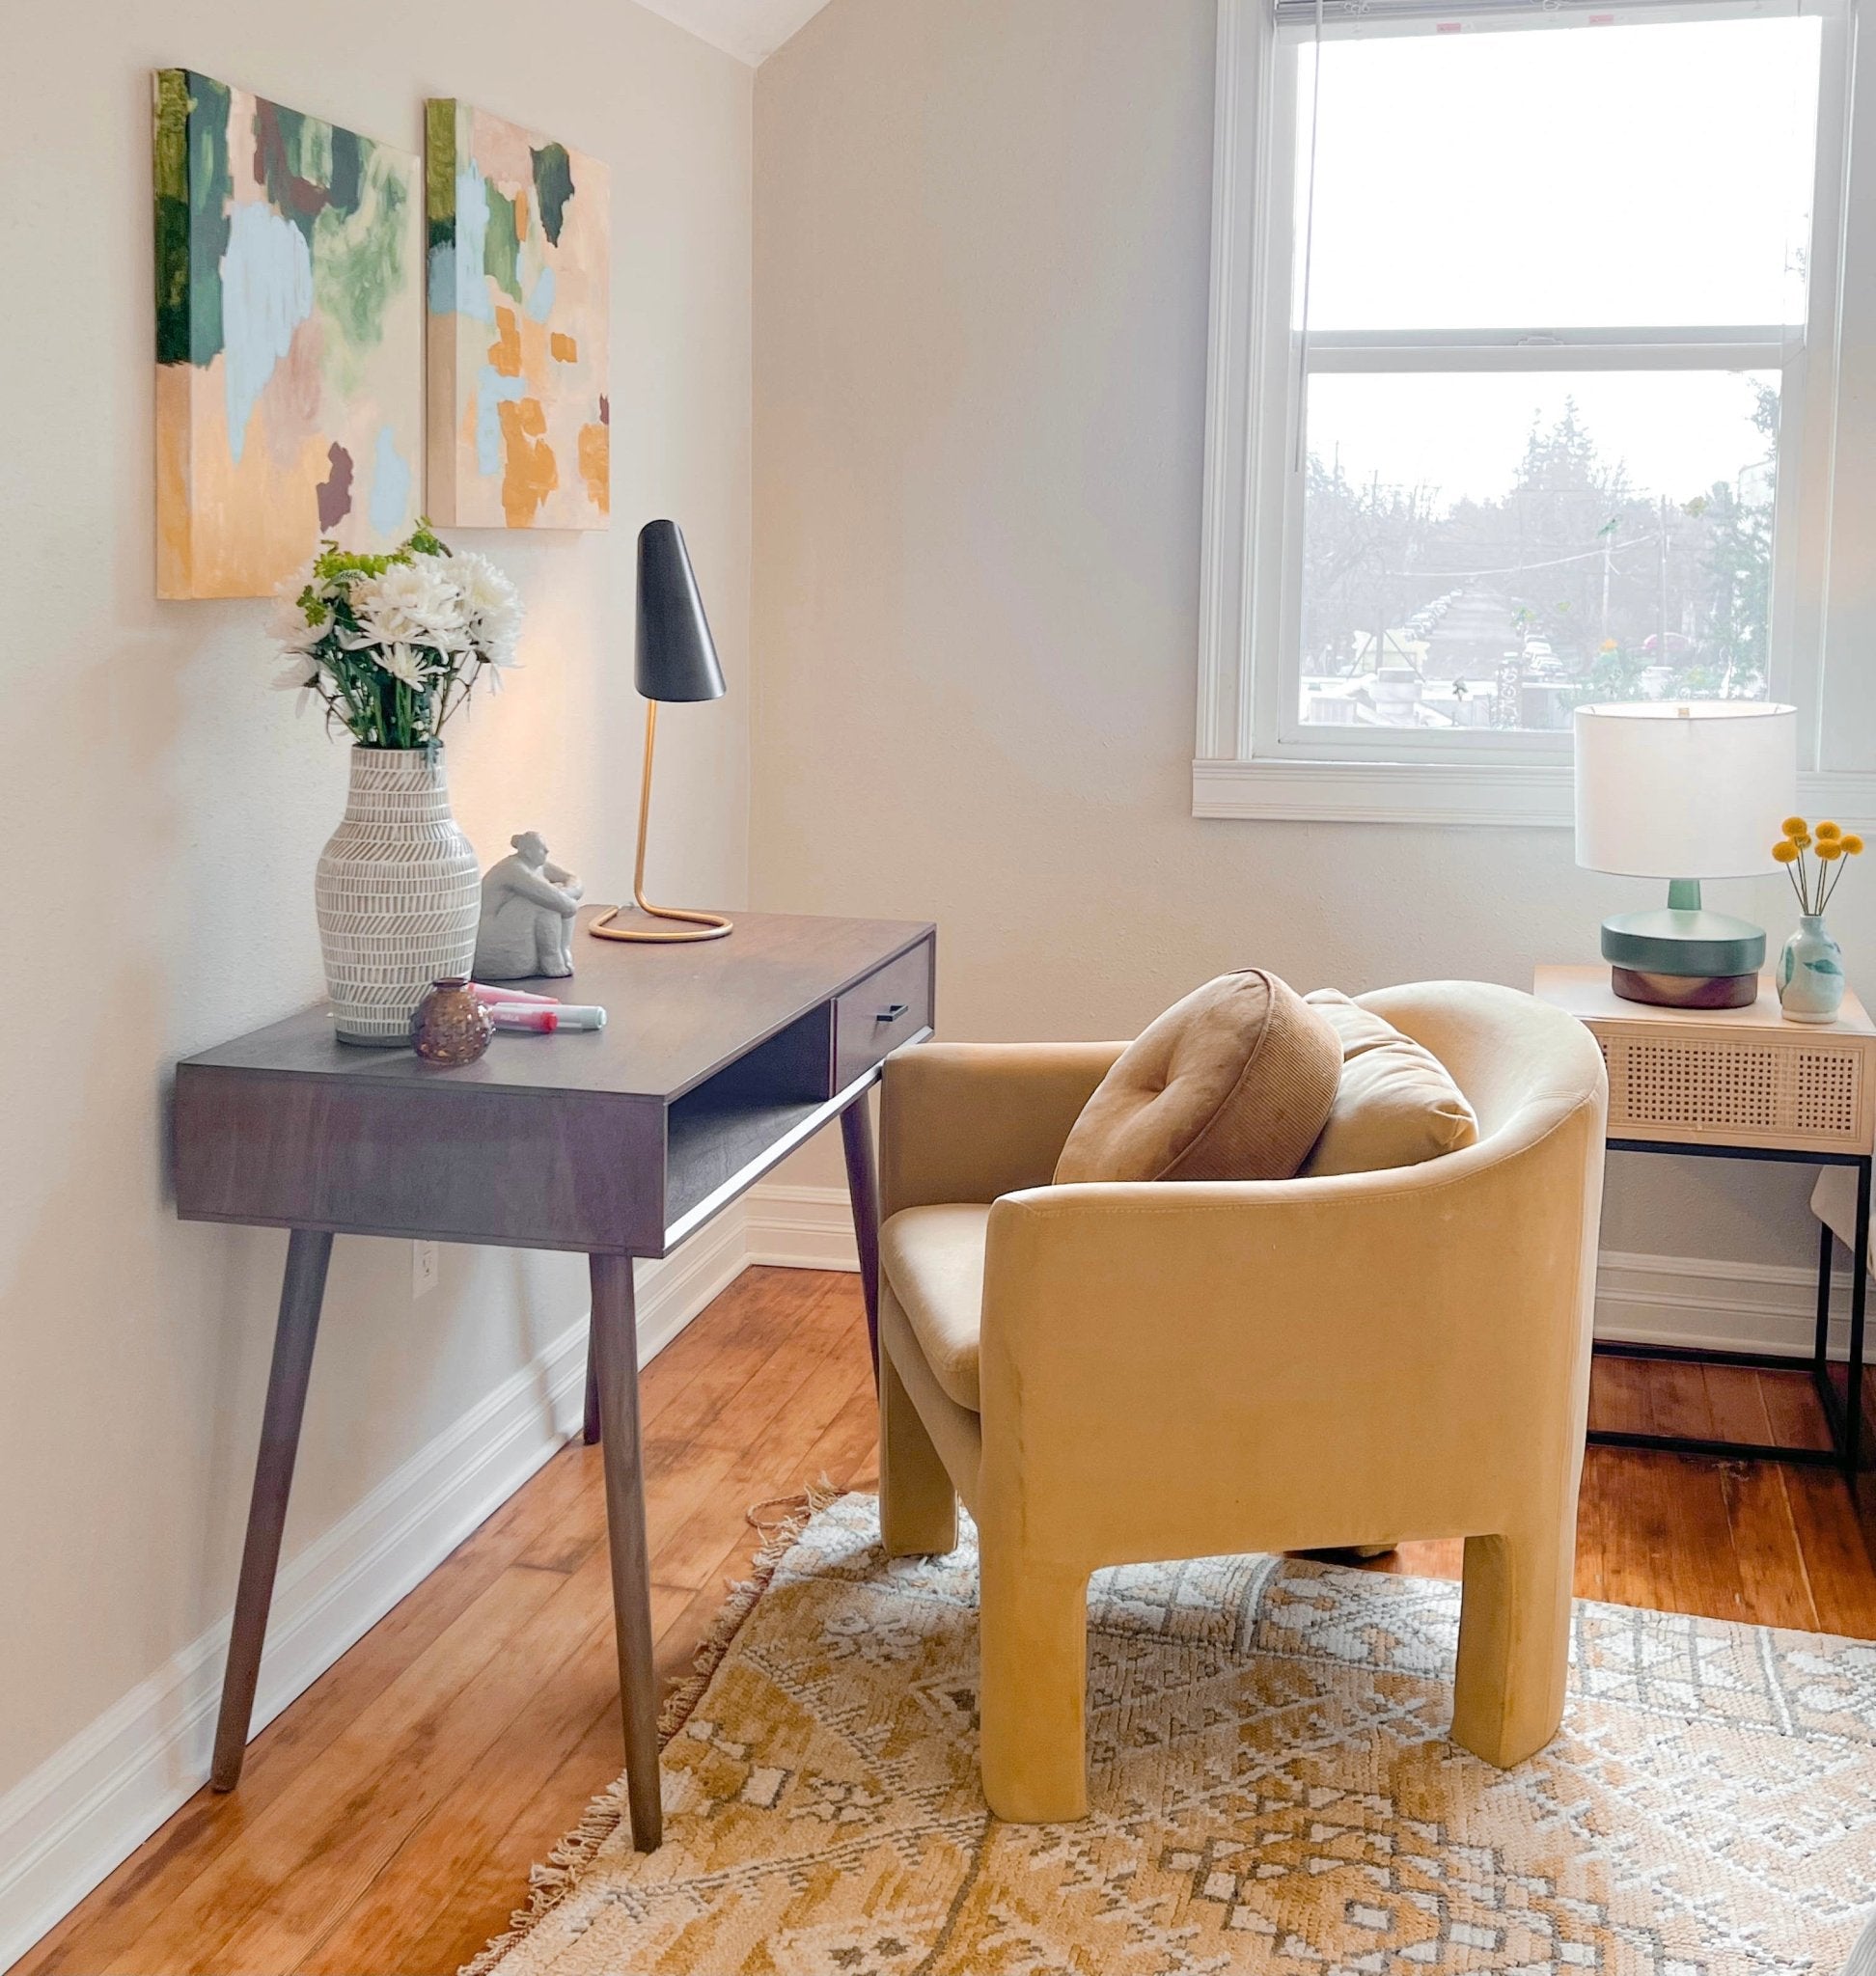 Size Matters: How to Select the Perfect Rug For Your Home - Modern Myth Decor